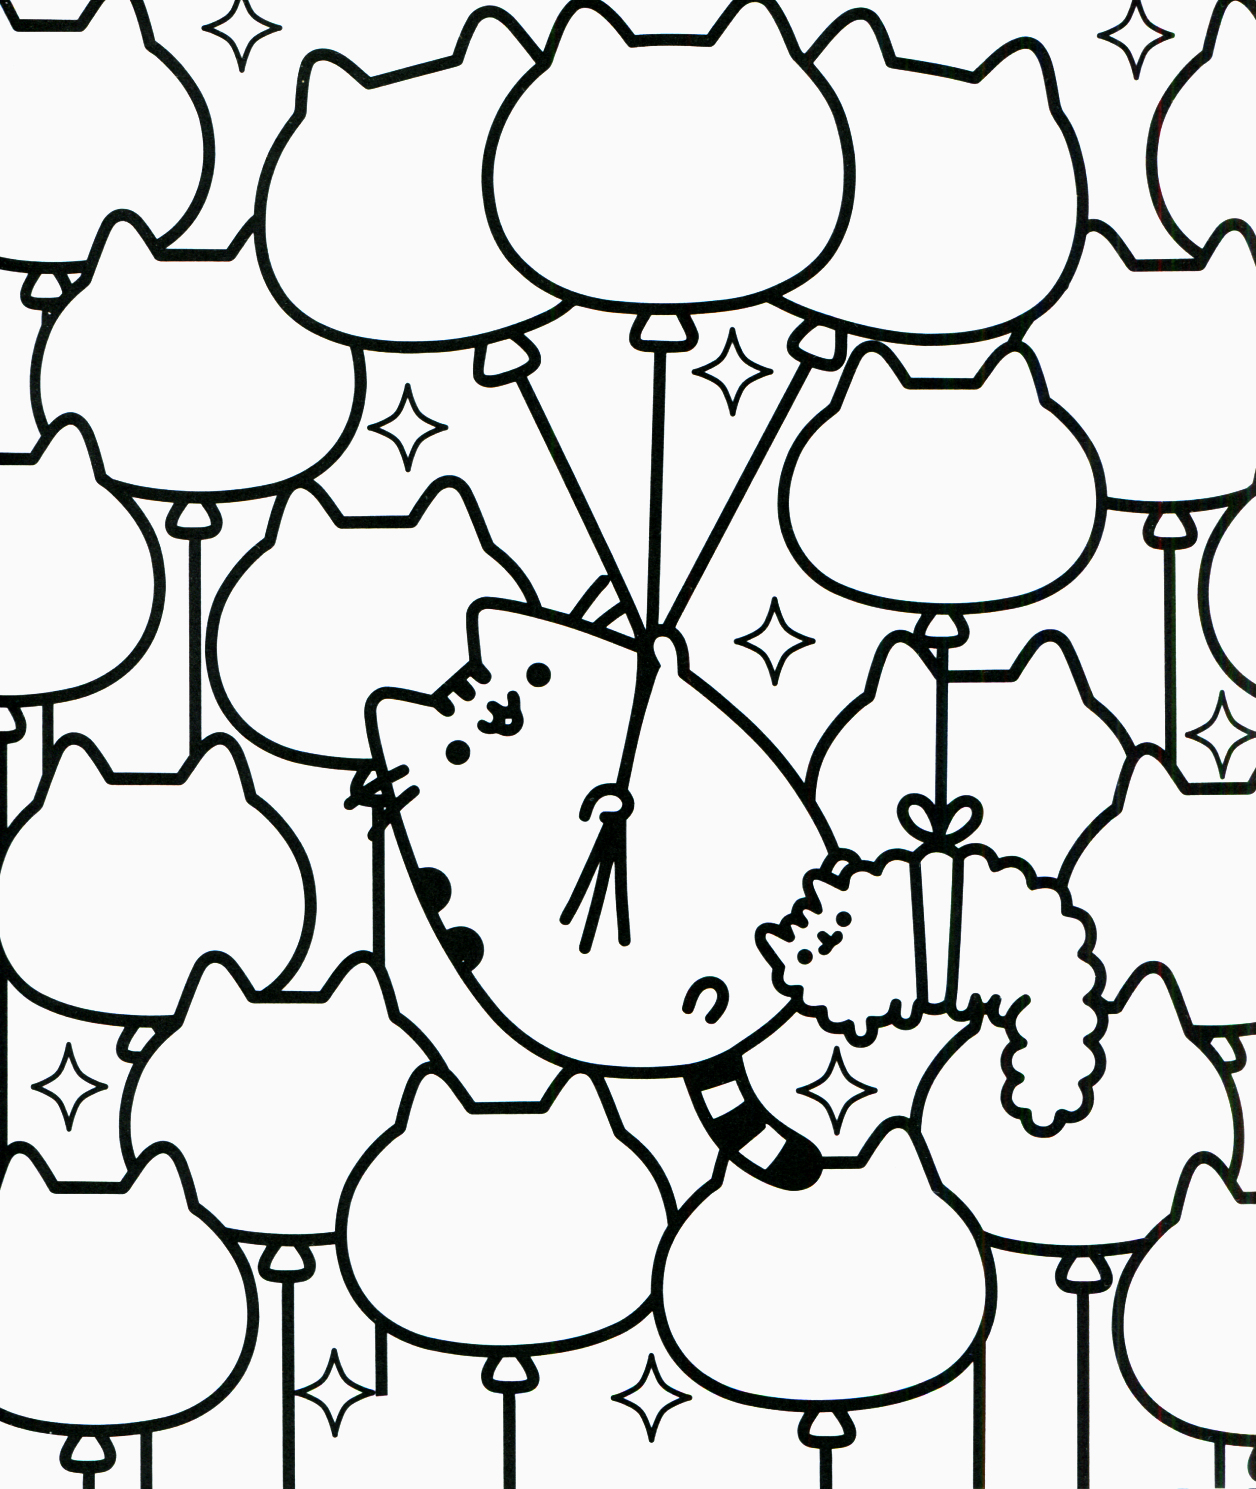 Pusheen Coloring Pages Printable | Database Coloring Page Ideas